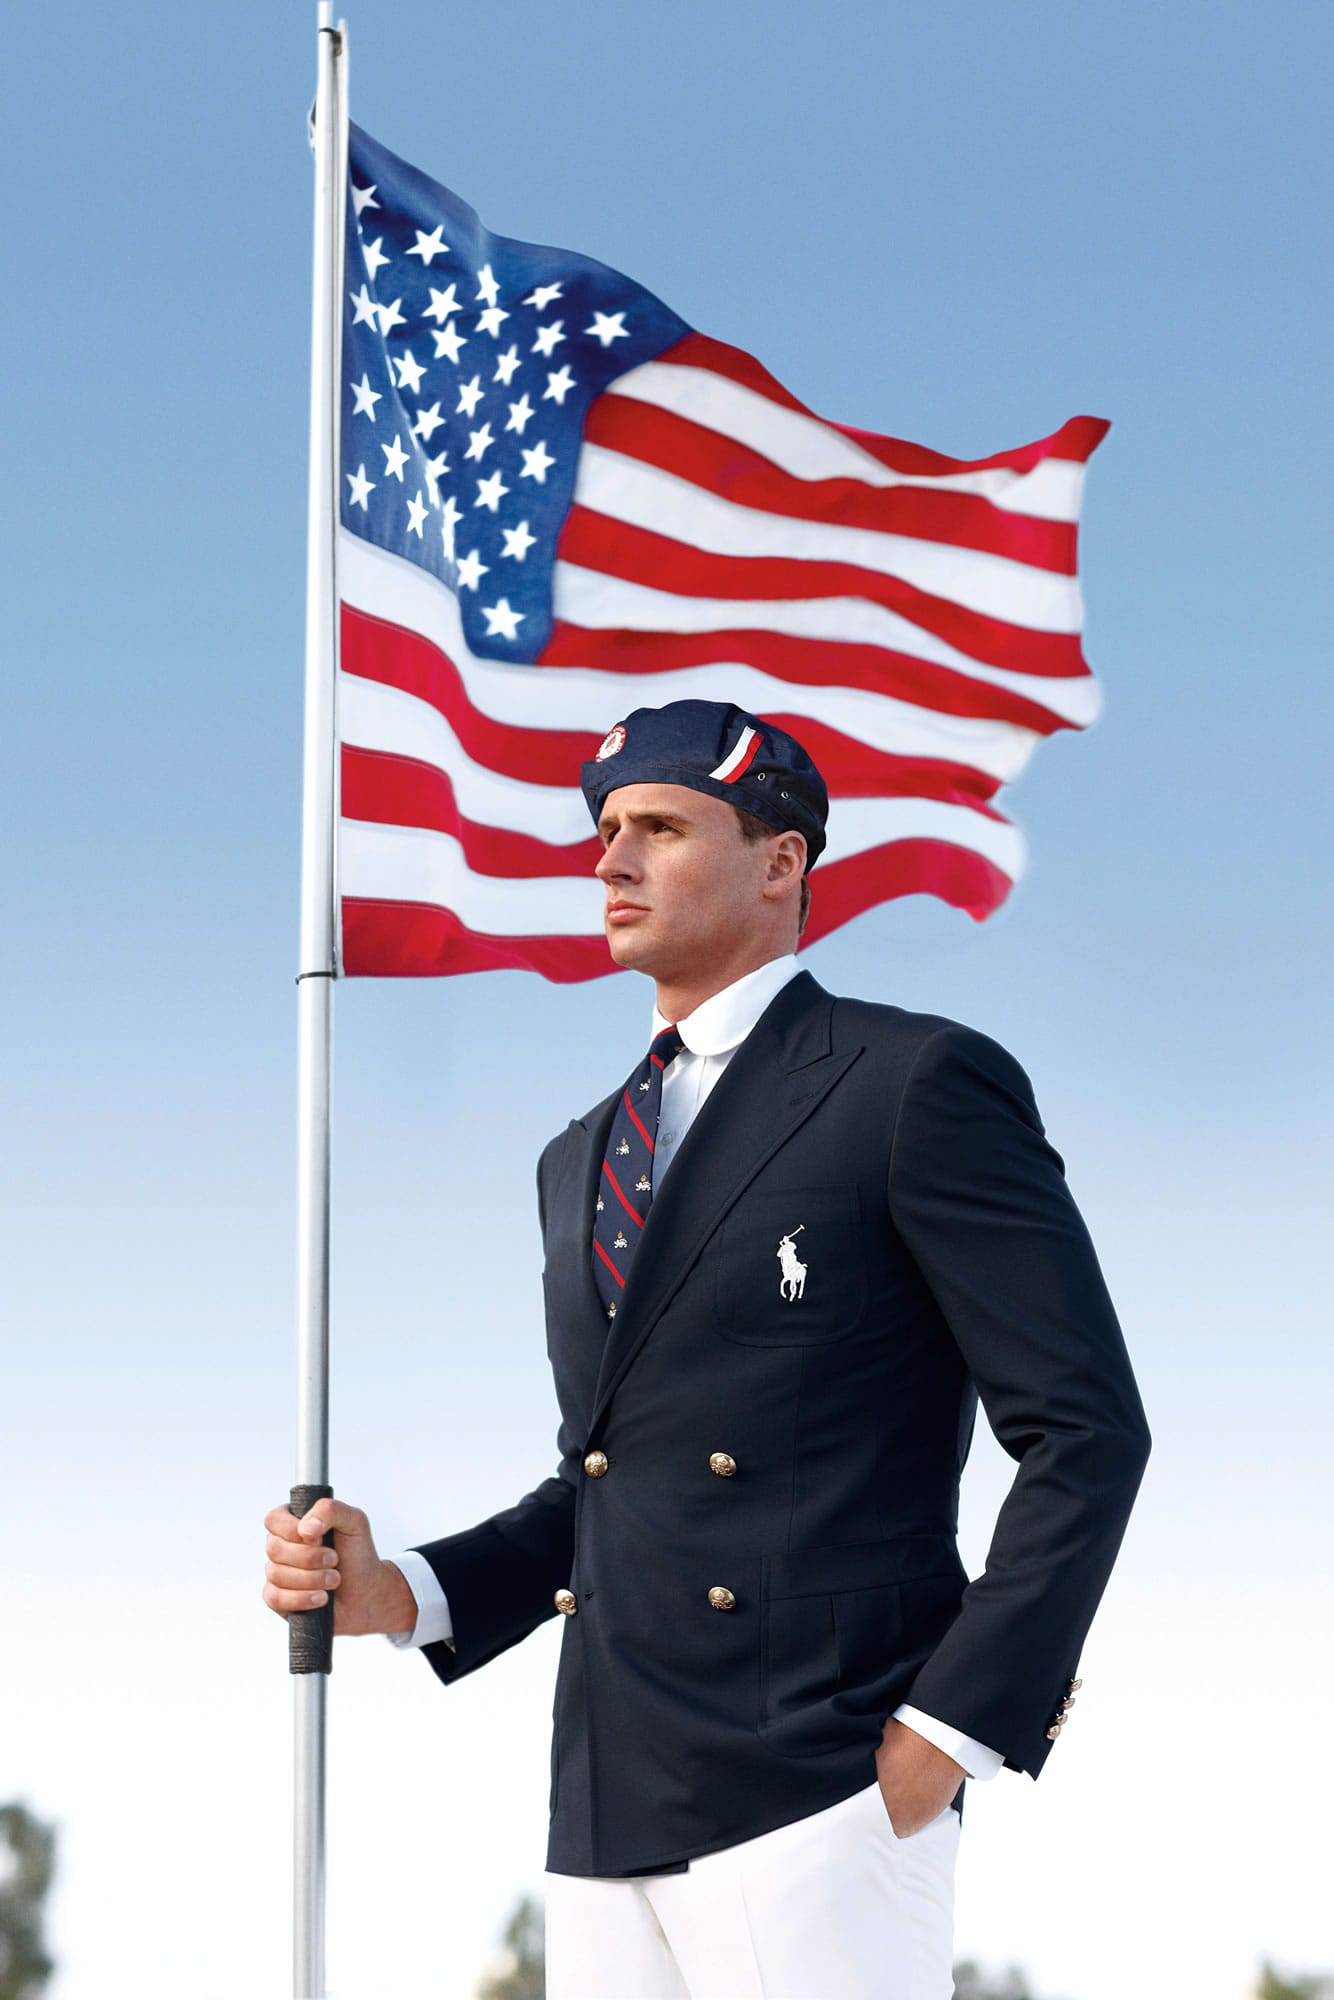 This product image released by Ralph Lauren shows U.S. Olympic swimmer Ryan Lochte modeling the the official Team USA Opening Ceremony Parade Uniform. As an official outfitter of the U.S. Olympic and Paralympic Teams, Ralph Lauren has designed Team USAis Official Opening and Closing Ceremony Parade Uniforms as well as a unique collection of village wear apparel and accessories which embodies the spirit of American athleticism and sportsmanship.